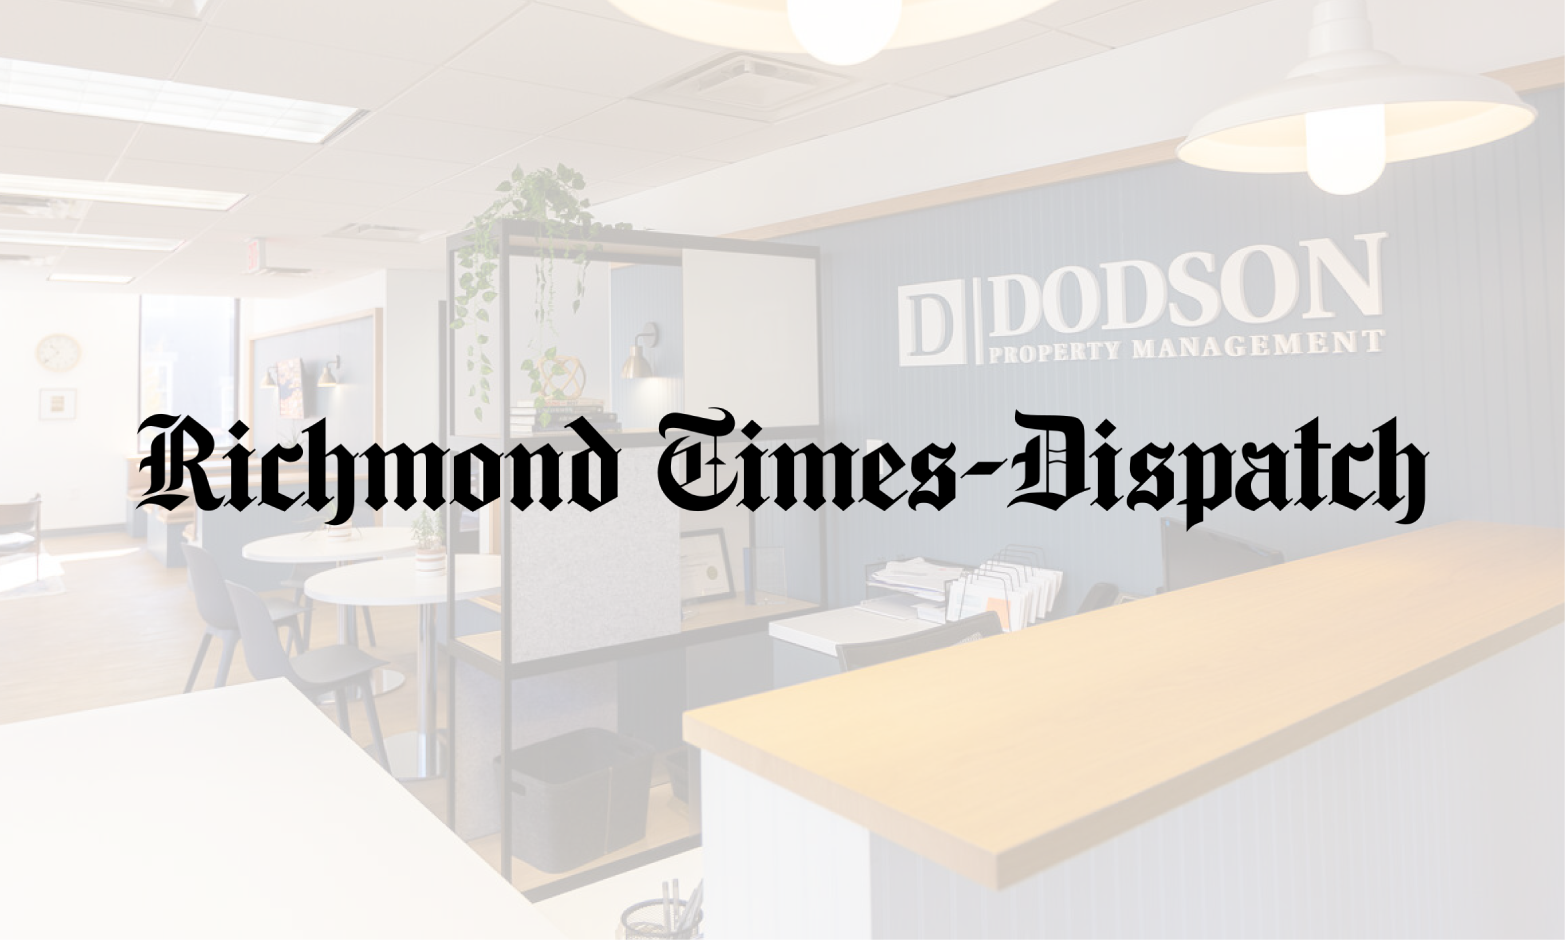 Richmond-based Dodson Property Management merges with Alabama, Florida firms